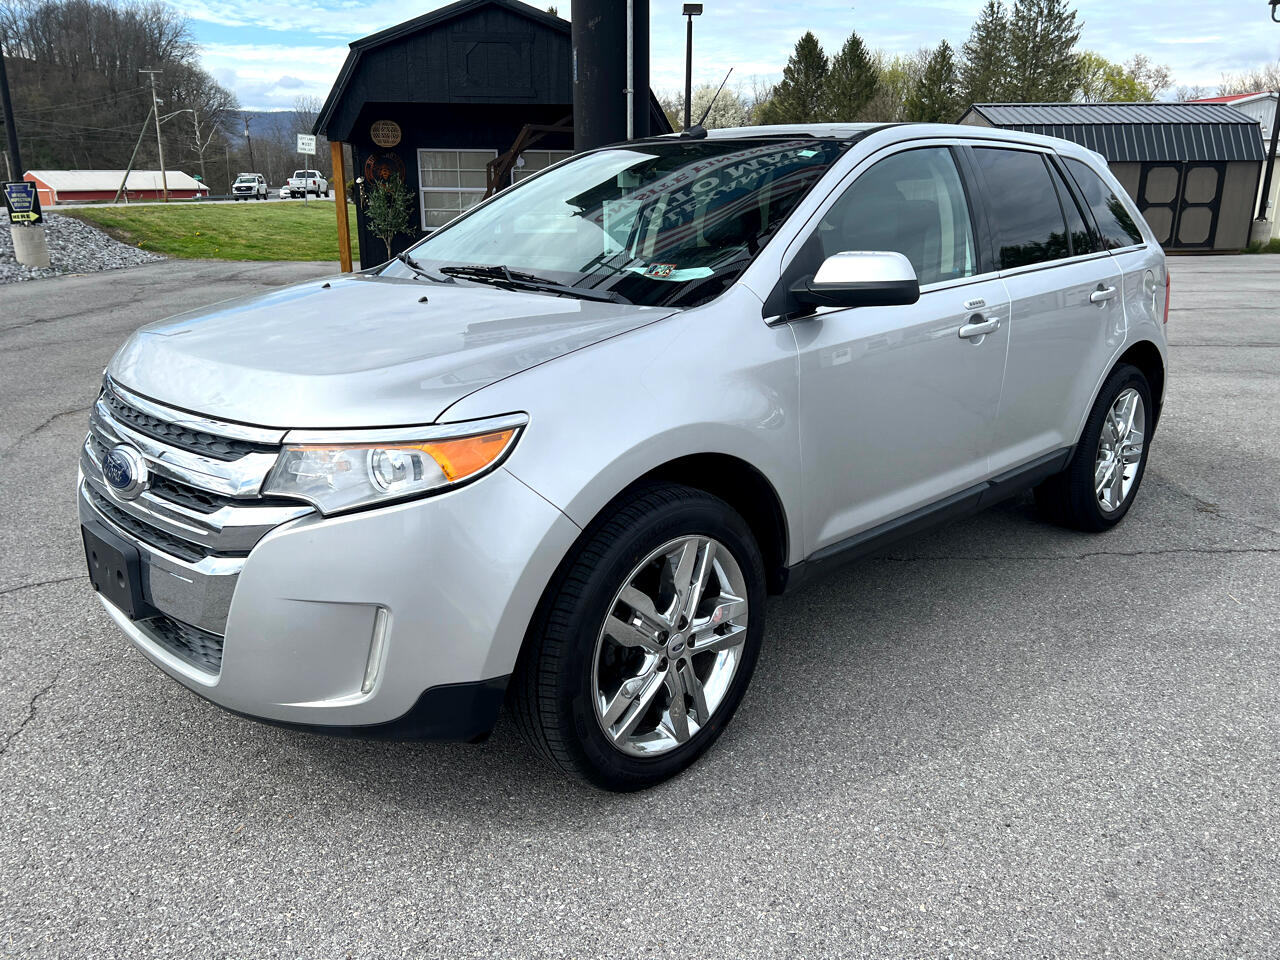 2013 Ford Edge 4dr Limited AWD